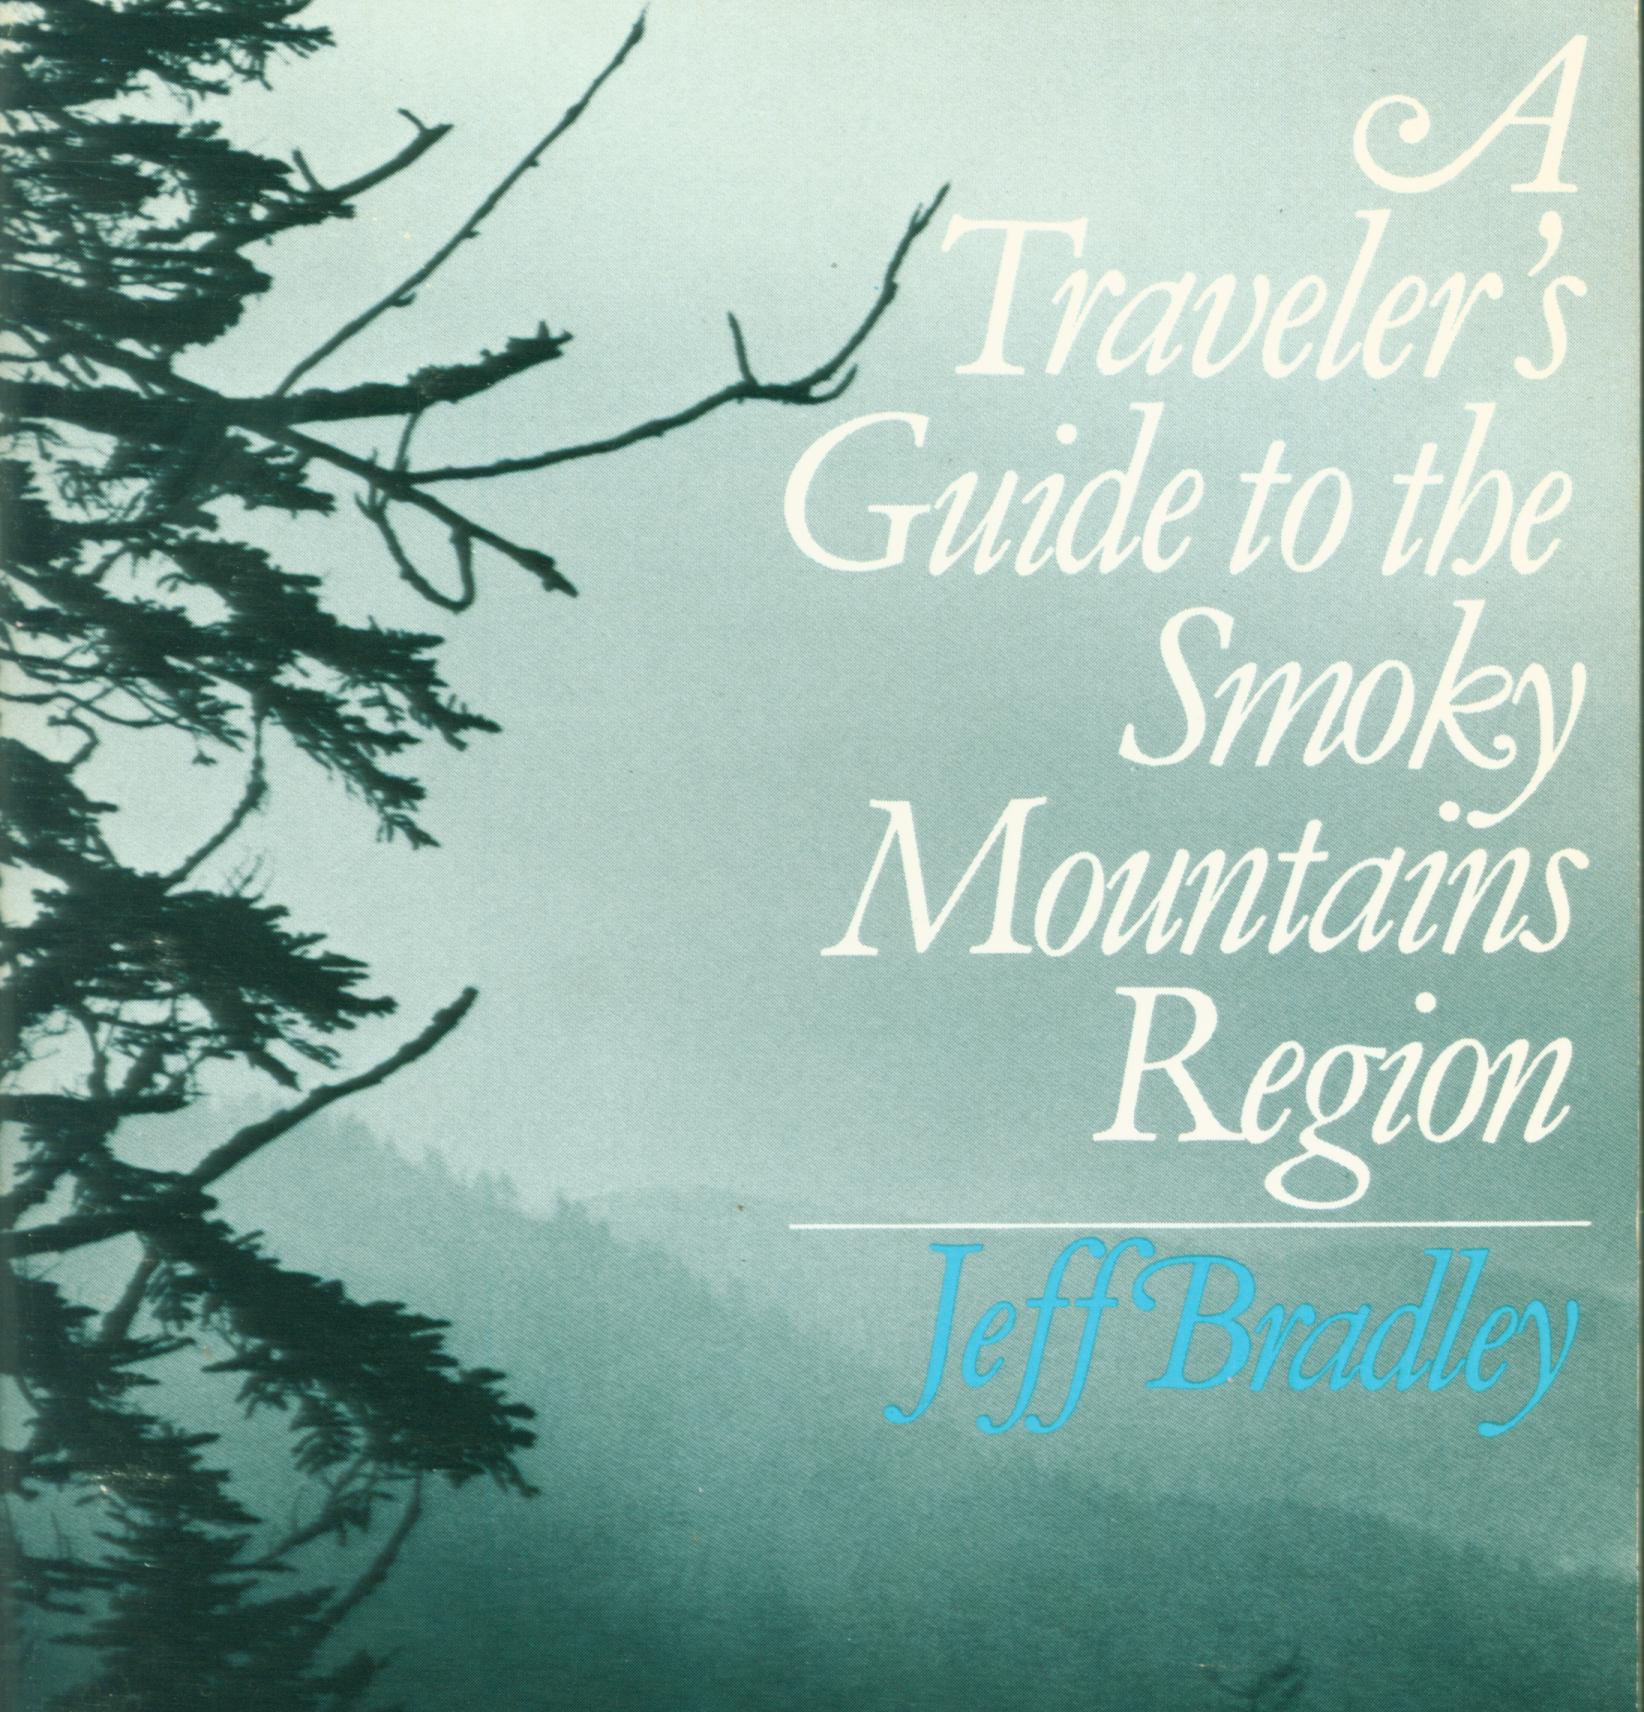 A TRAVELER'S GUIDE TO THE SMOKY MOUNTAINS REGION.